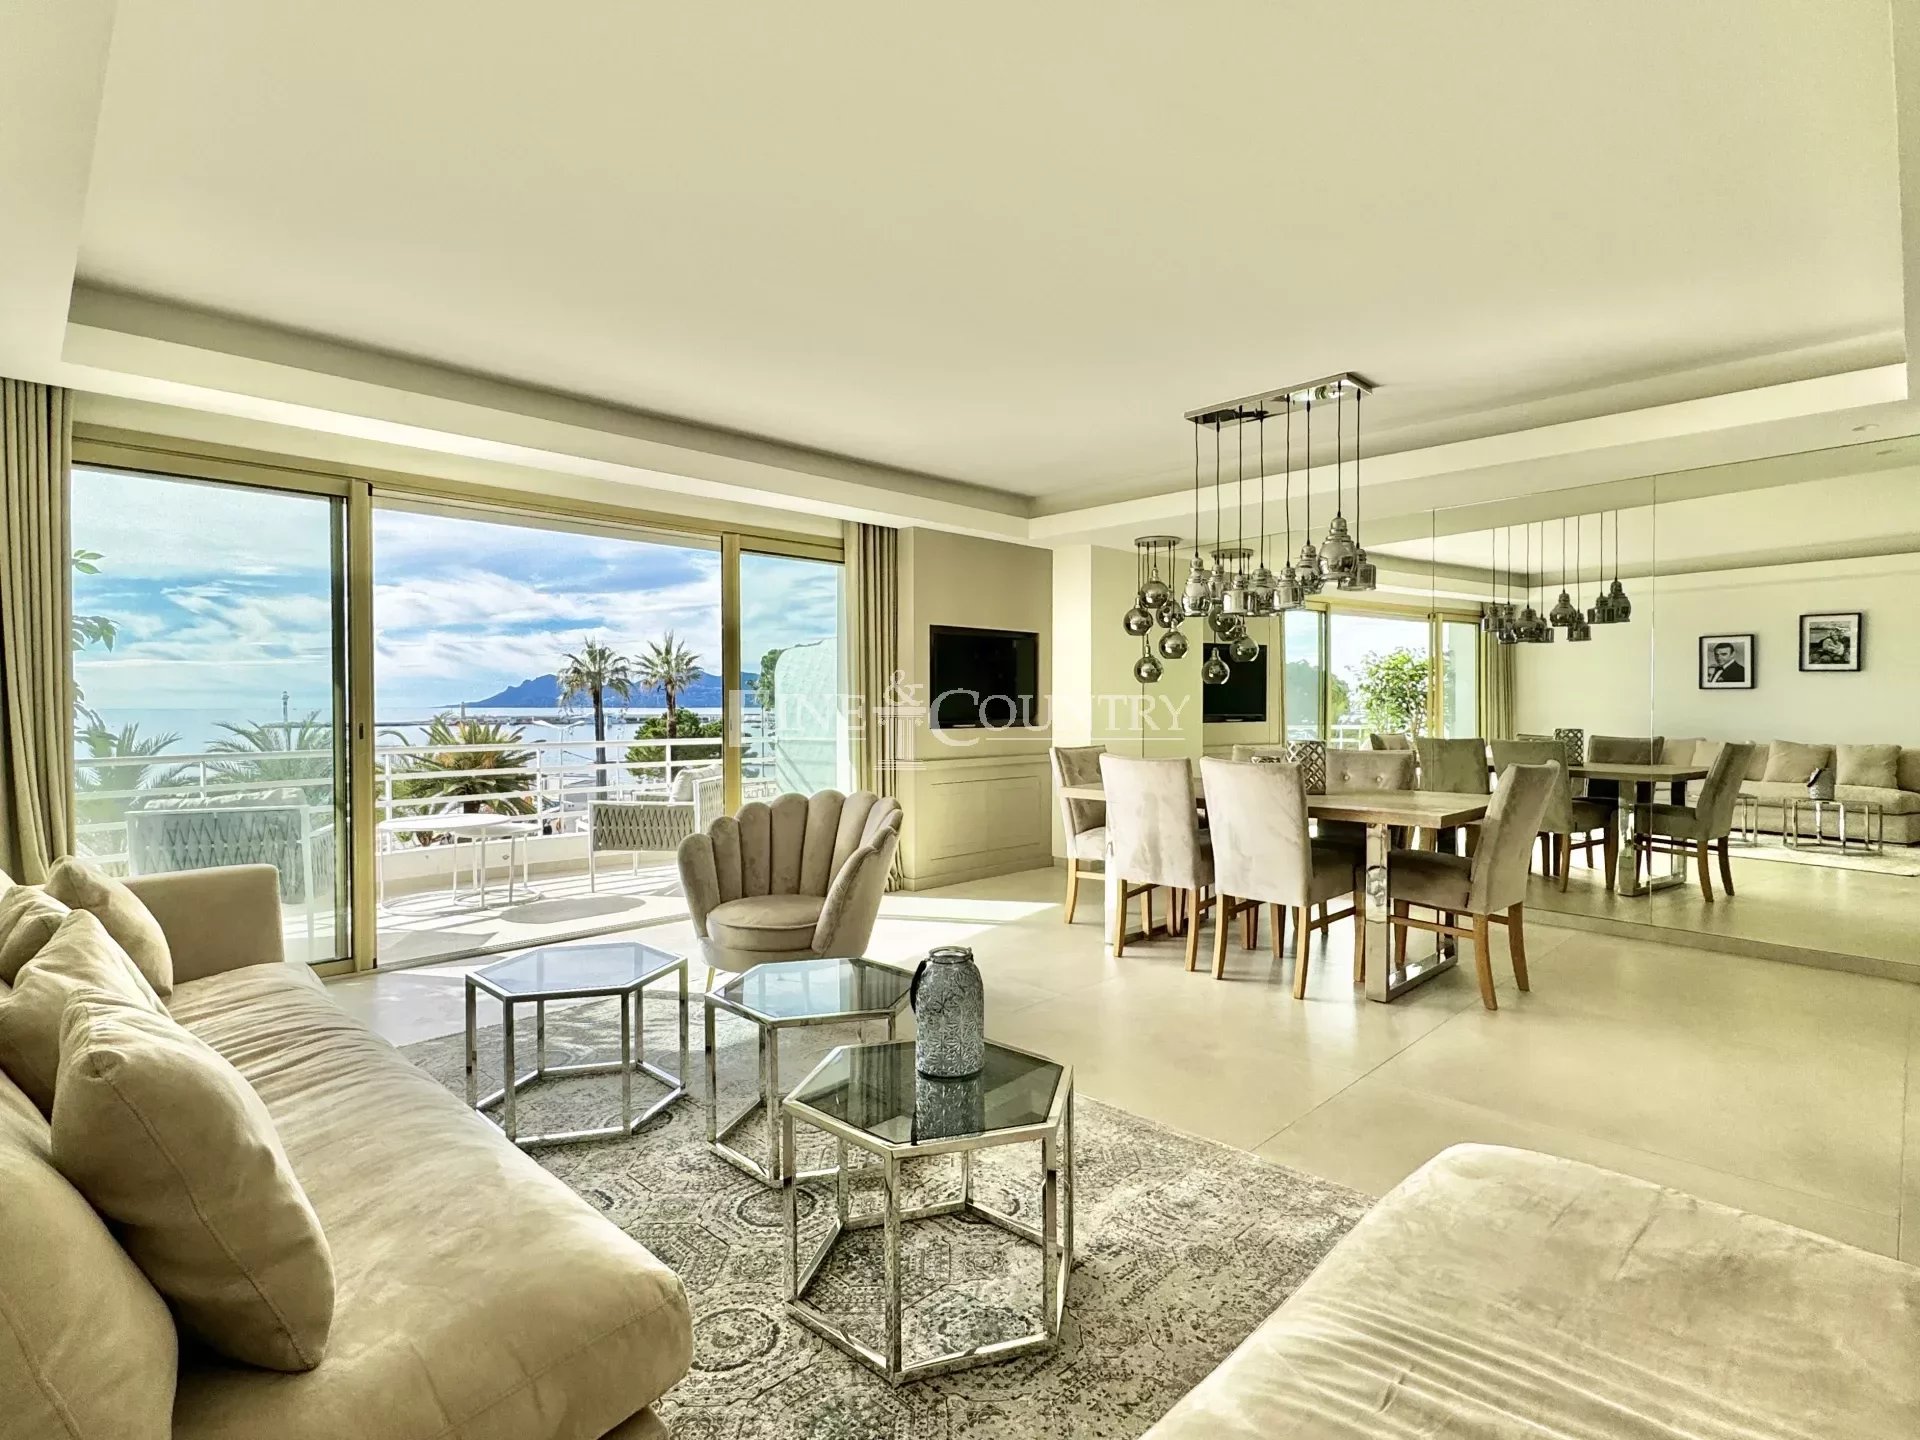 Luxury Croisette Apartment for sale on the Croisette, Cannes Accommodation in Cannes